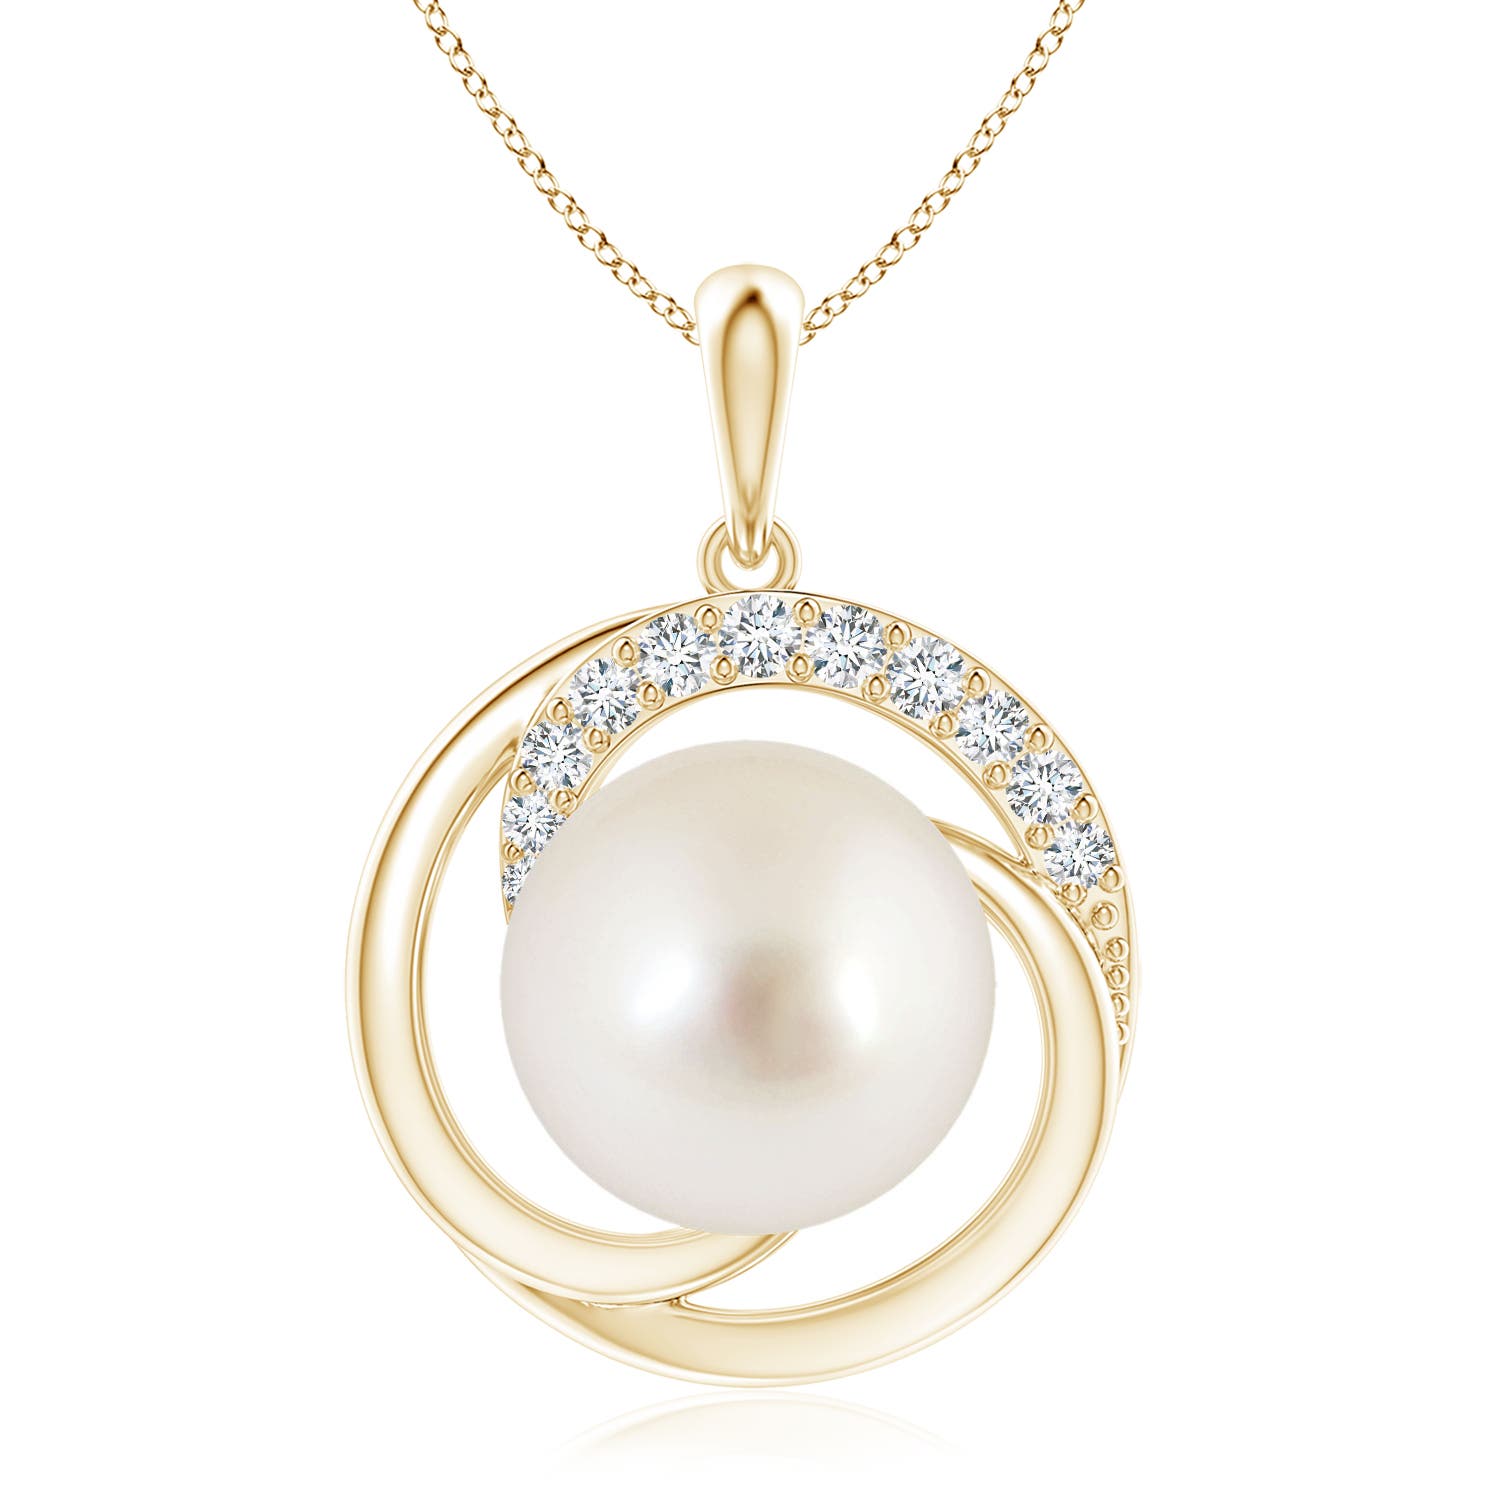 AAAA - South Sea Cultured Pearl / 9.76 CT / 14 KT Yellow Gold